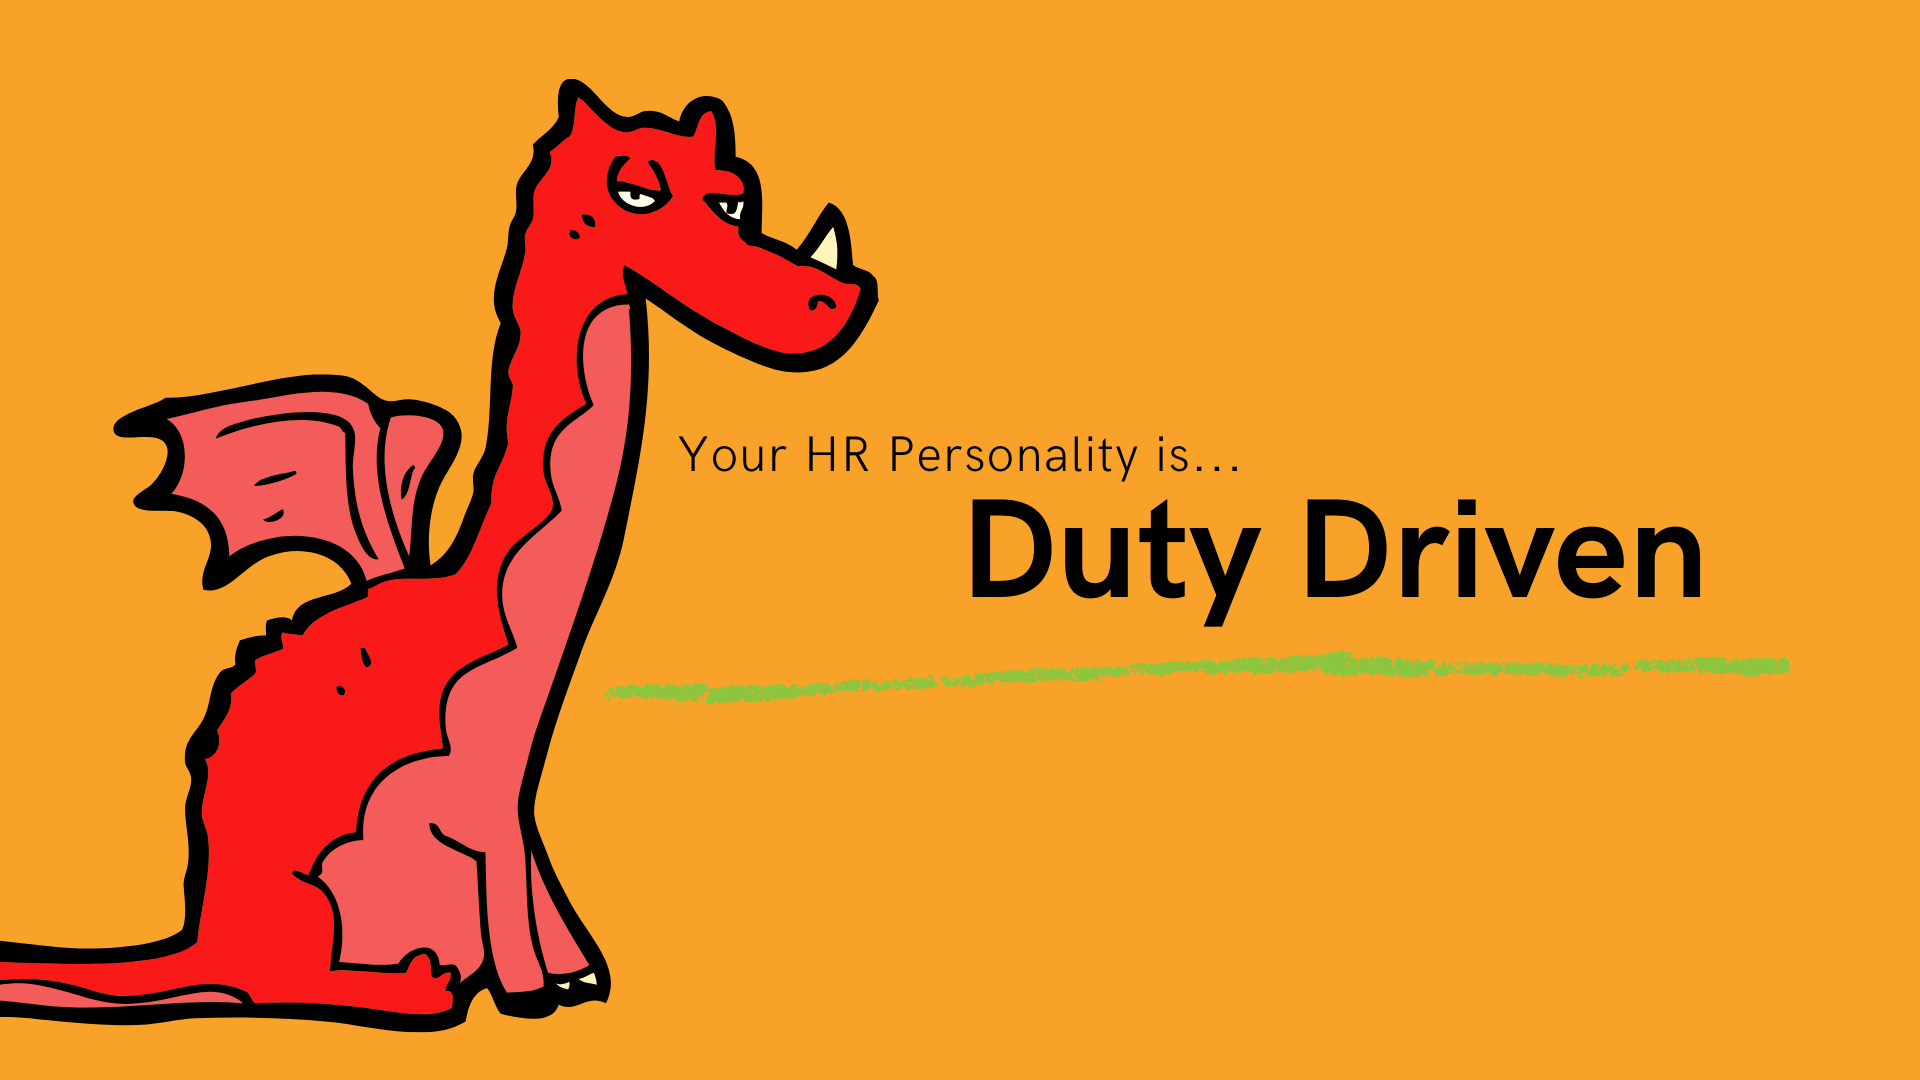 Duty Driven HR Personality image